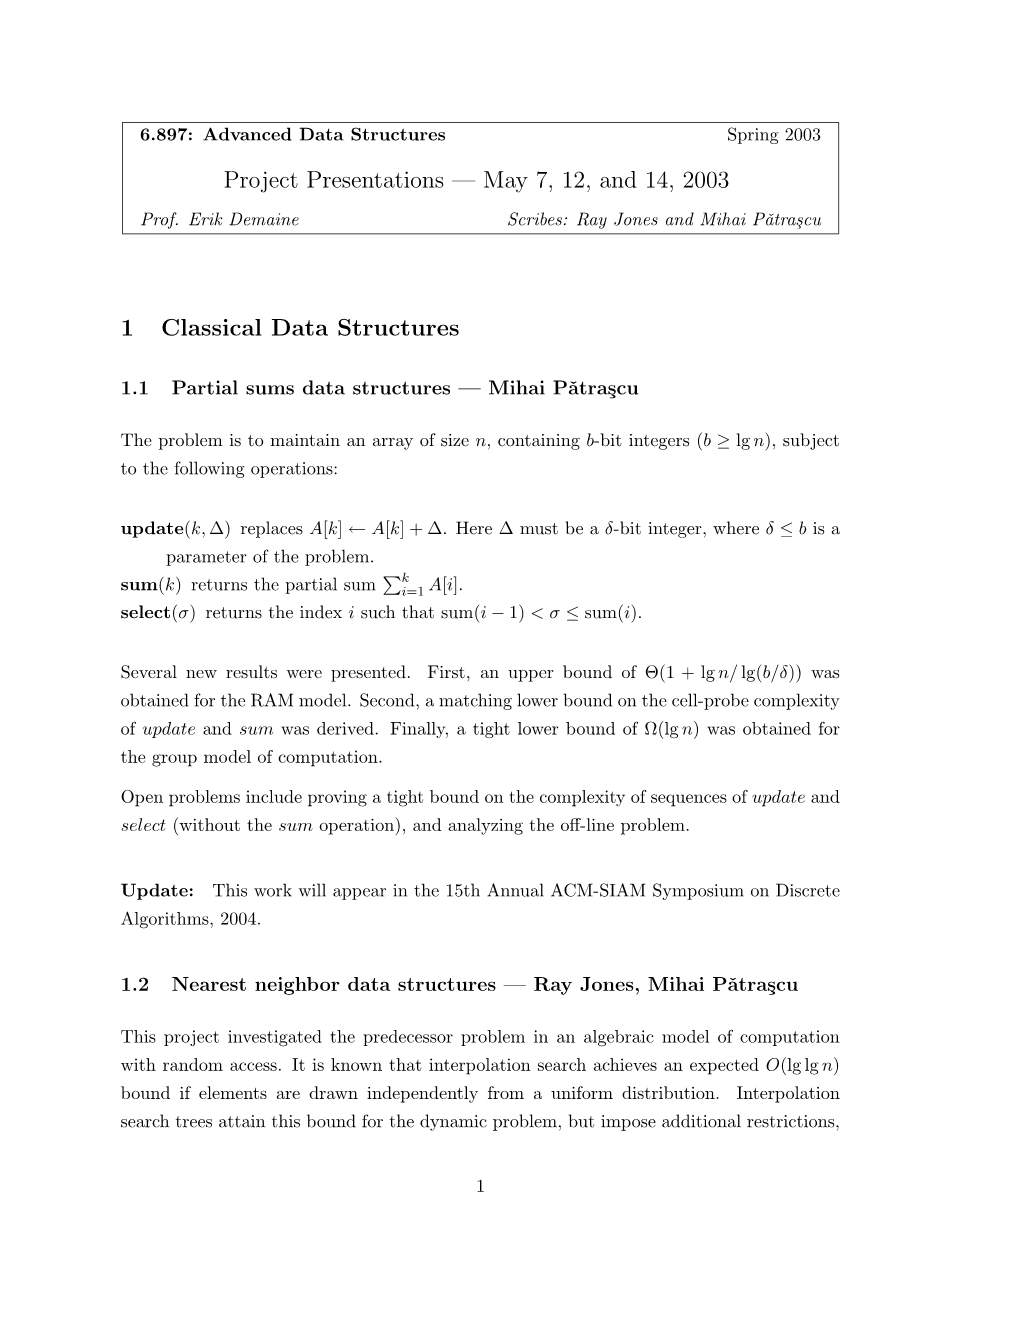 May 7, 12, and 14, 2003 1 Classical Data Structures